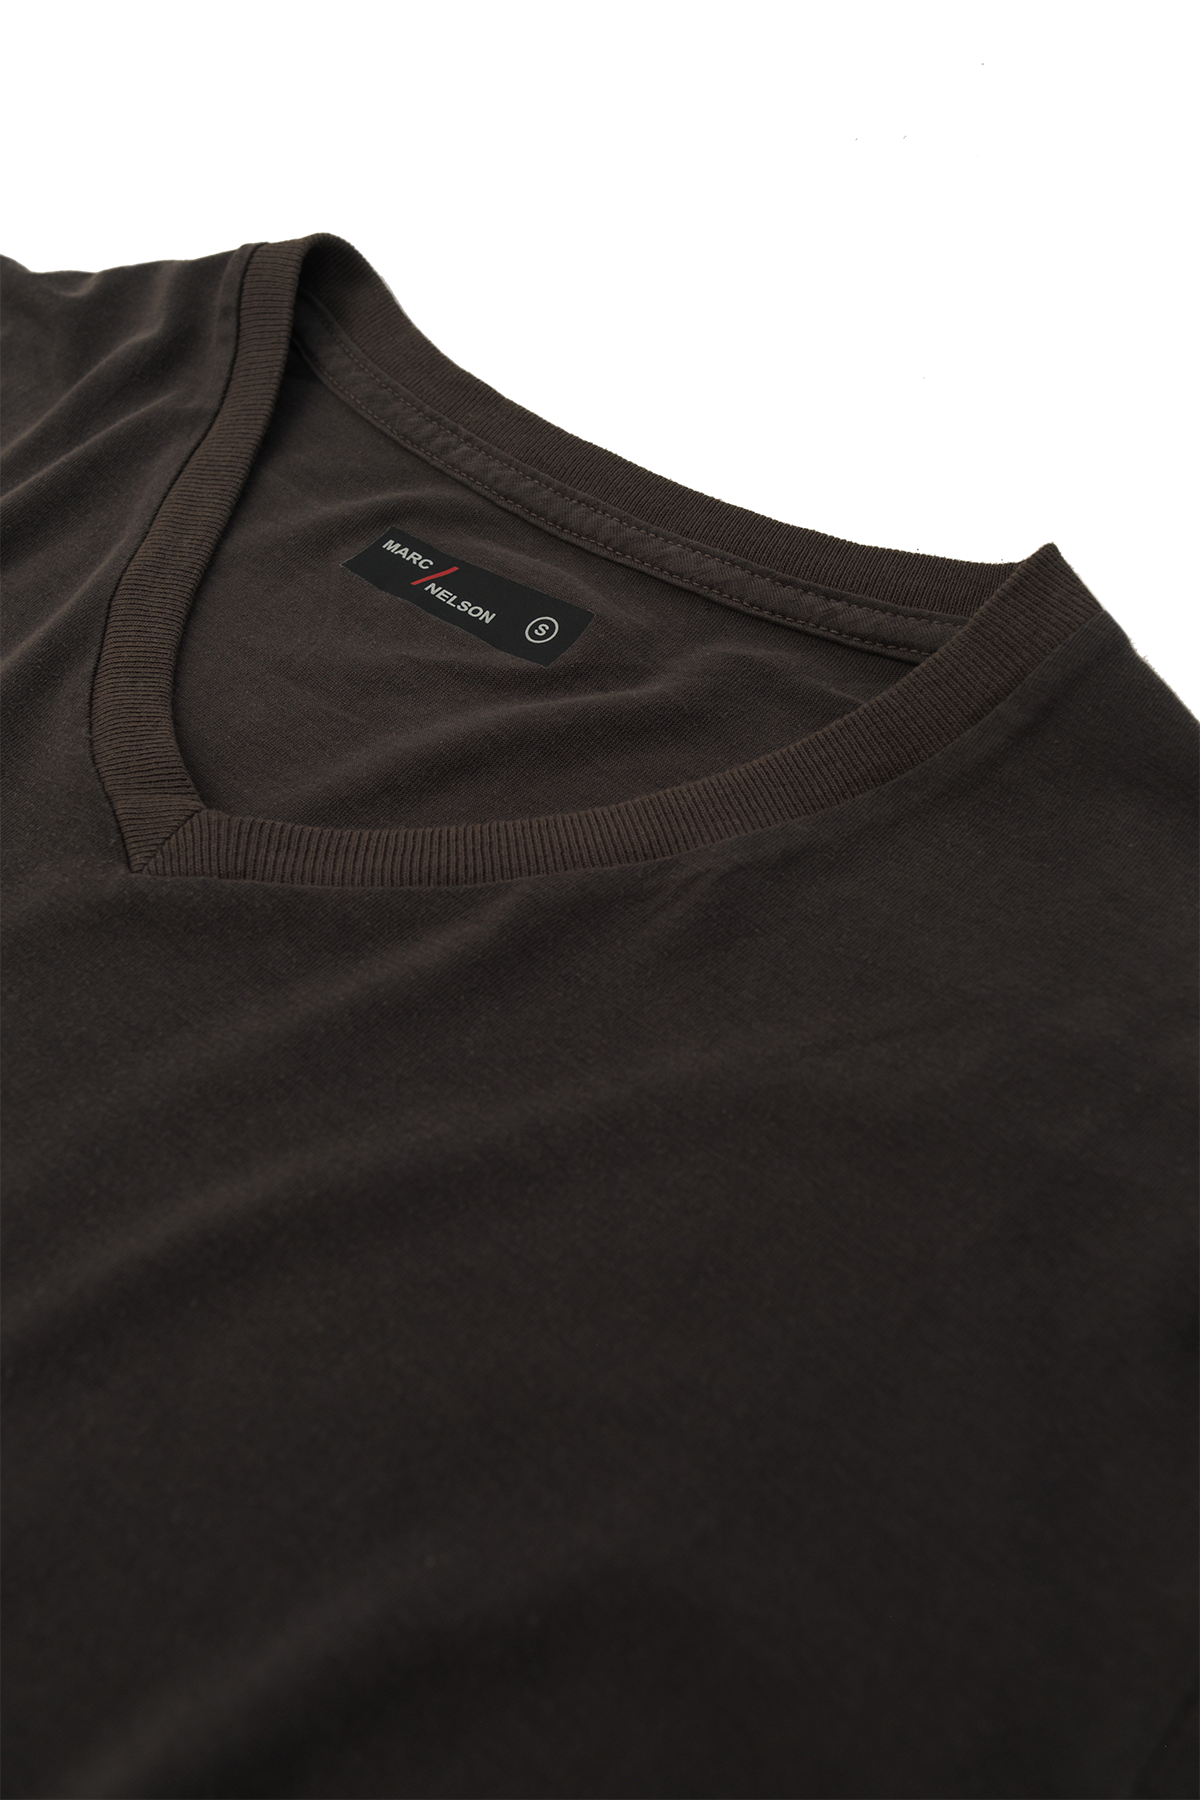 Close up of grey v-neck t-shirt laid flat on a white background.